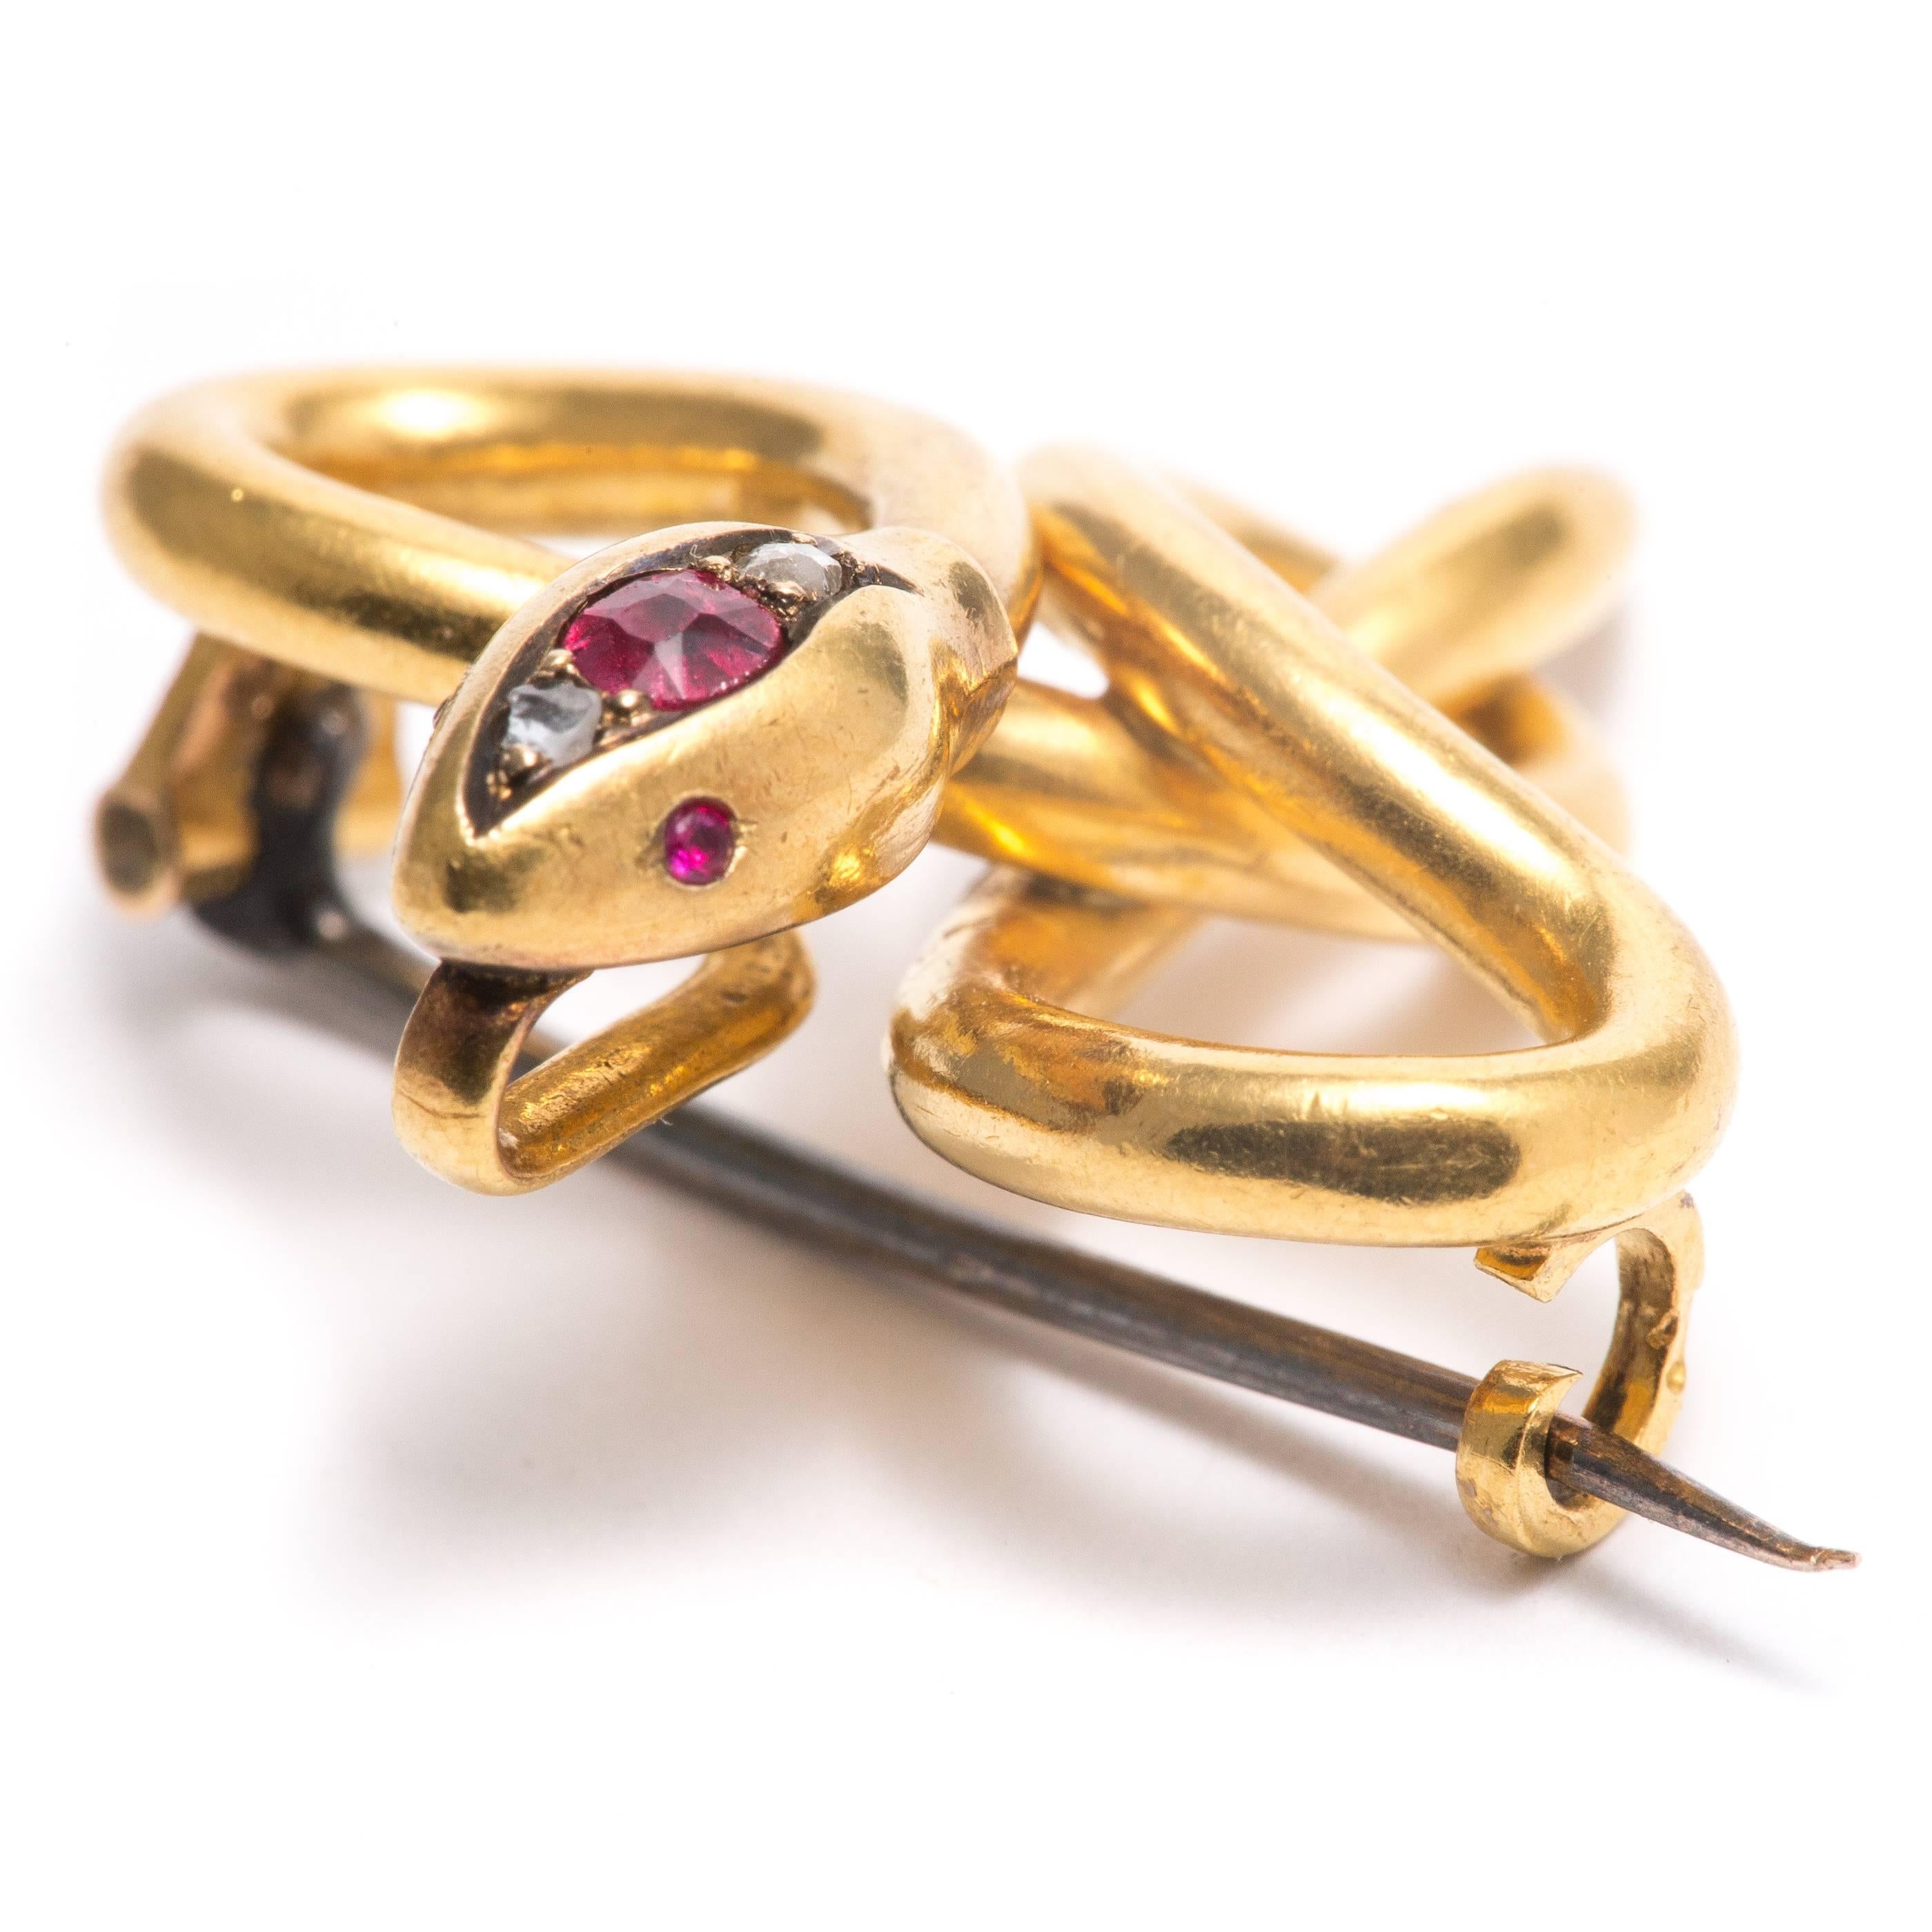 A French, art nouveau period serpent form brooch in 18 karat yellow gold.  Featuring  ruby and diamond set head along with ruby eyes, this brooch is beautifully crafted in a very fluid and French mannerism.

In excellent condition, this brooch